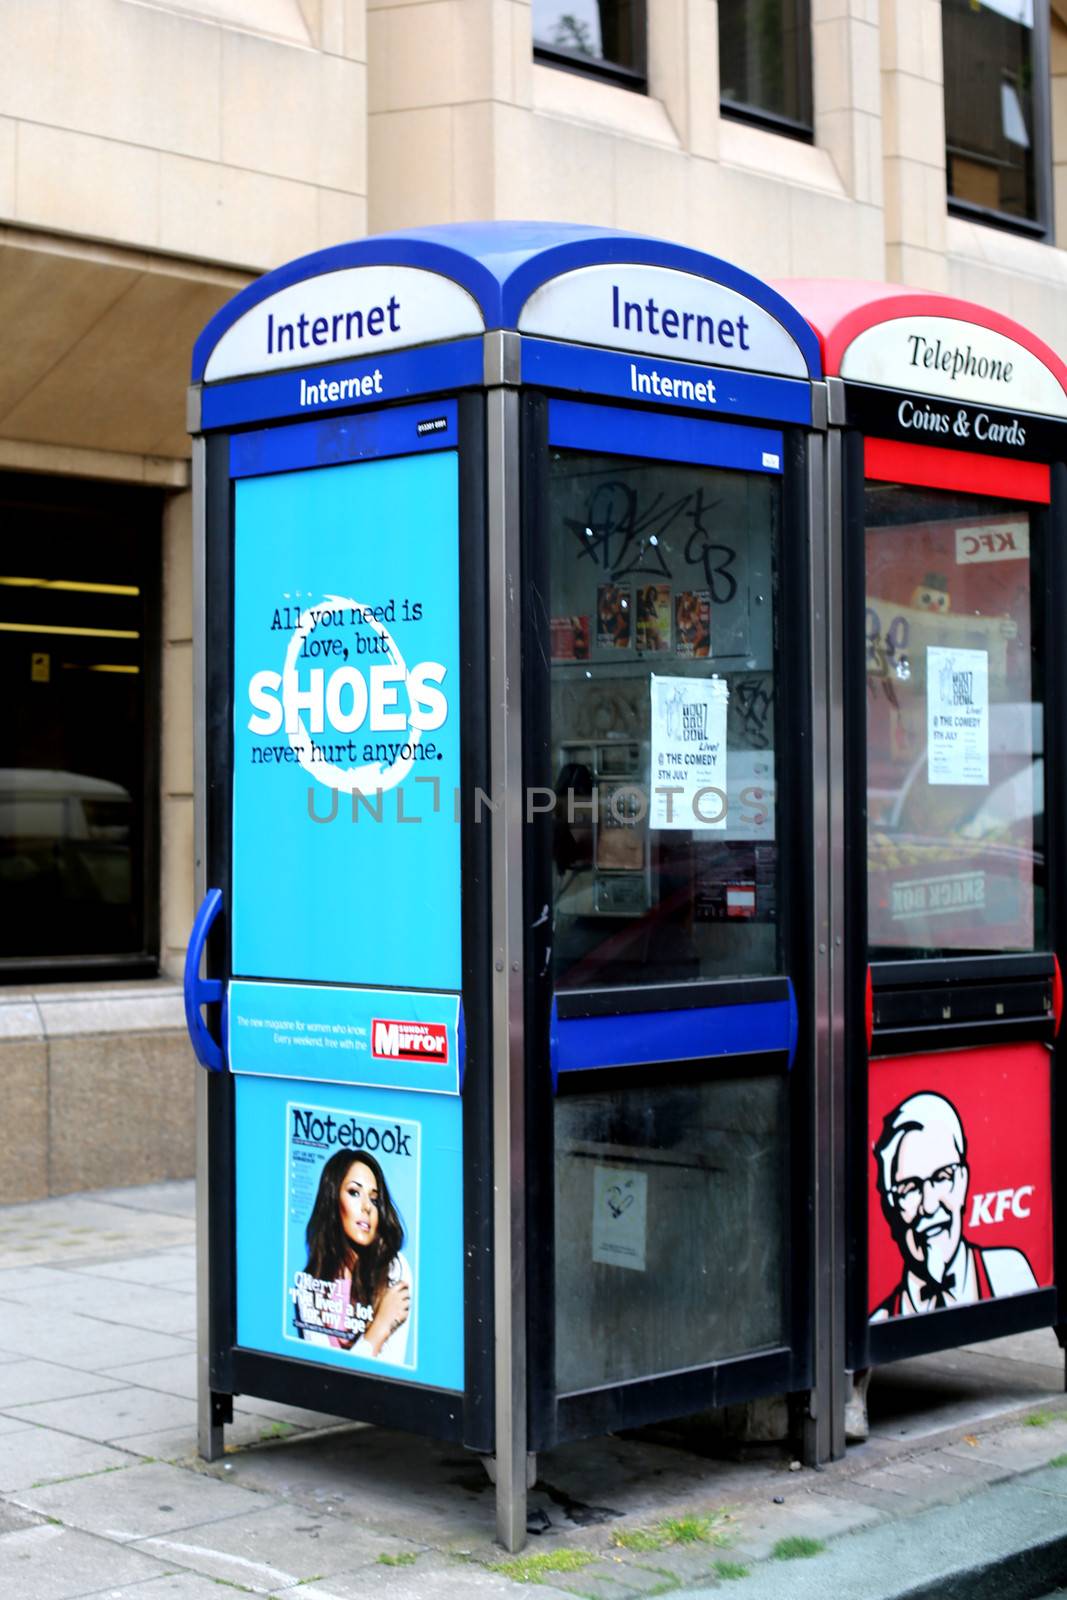 Public Internet and Telephone Boxes London by Whiteboxmedia